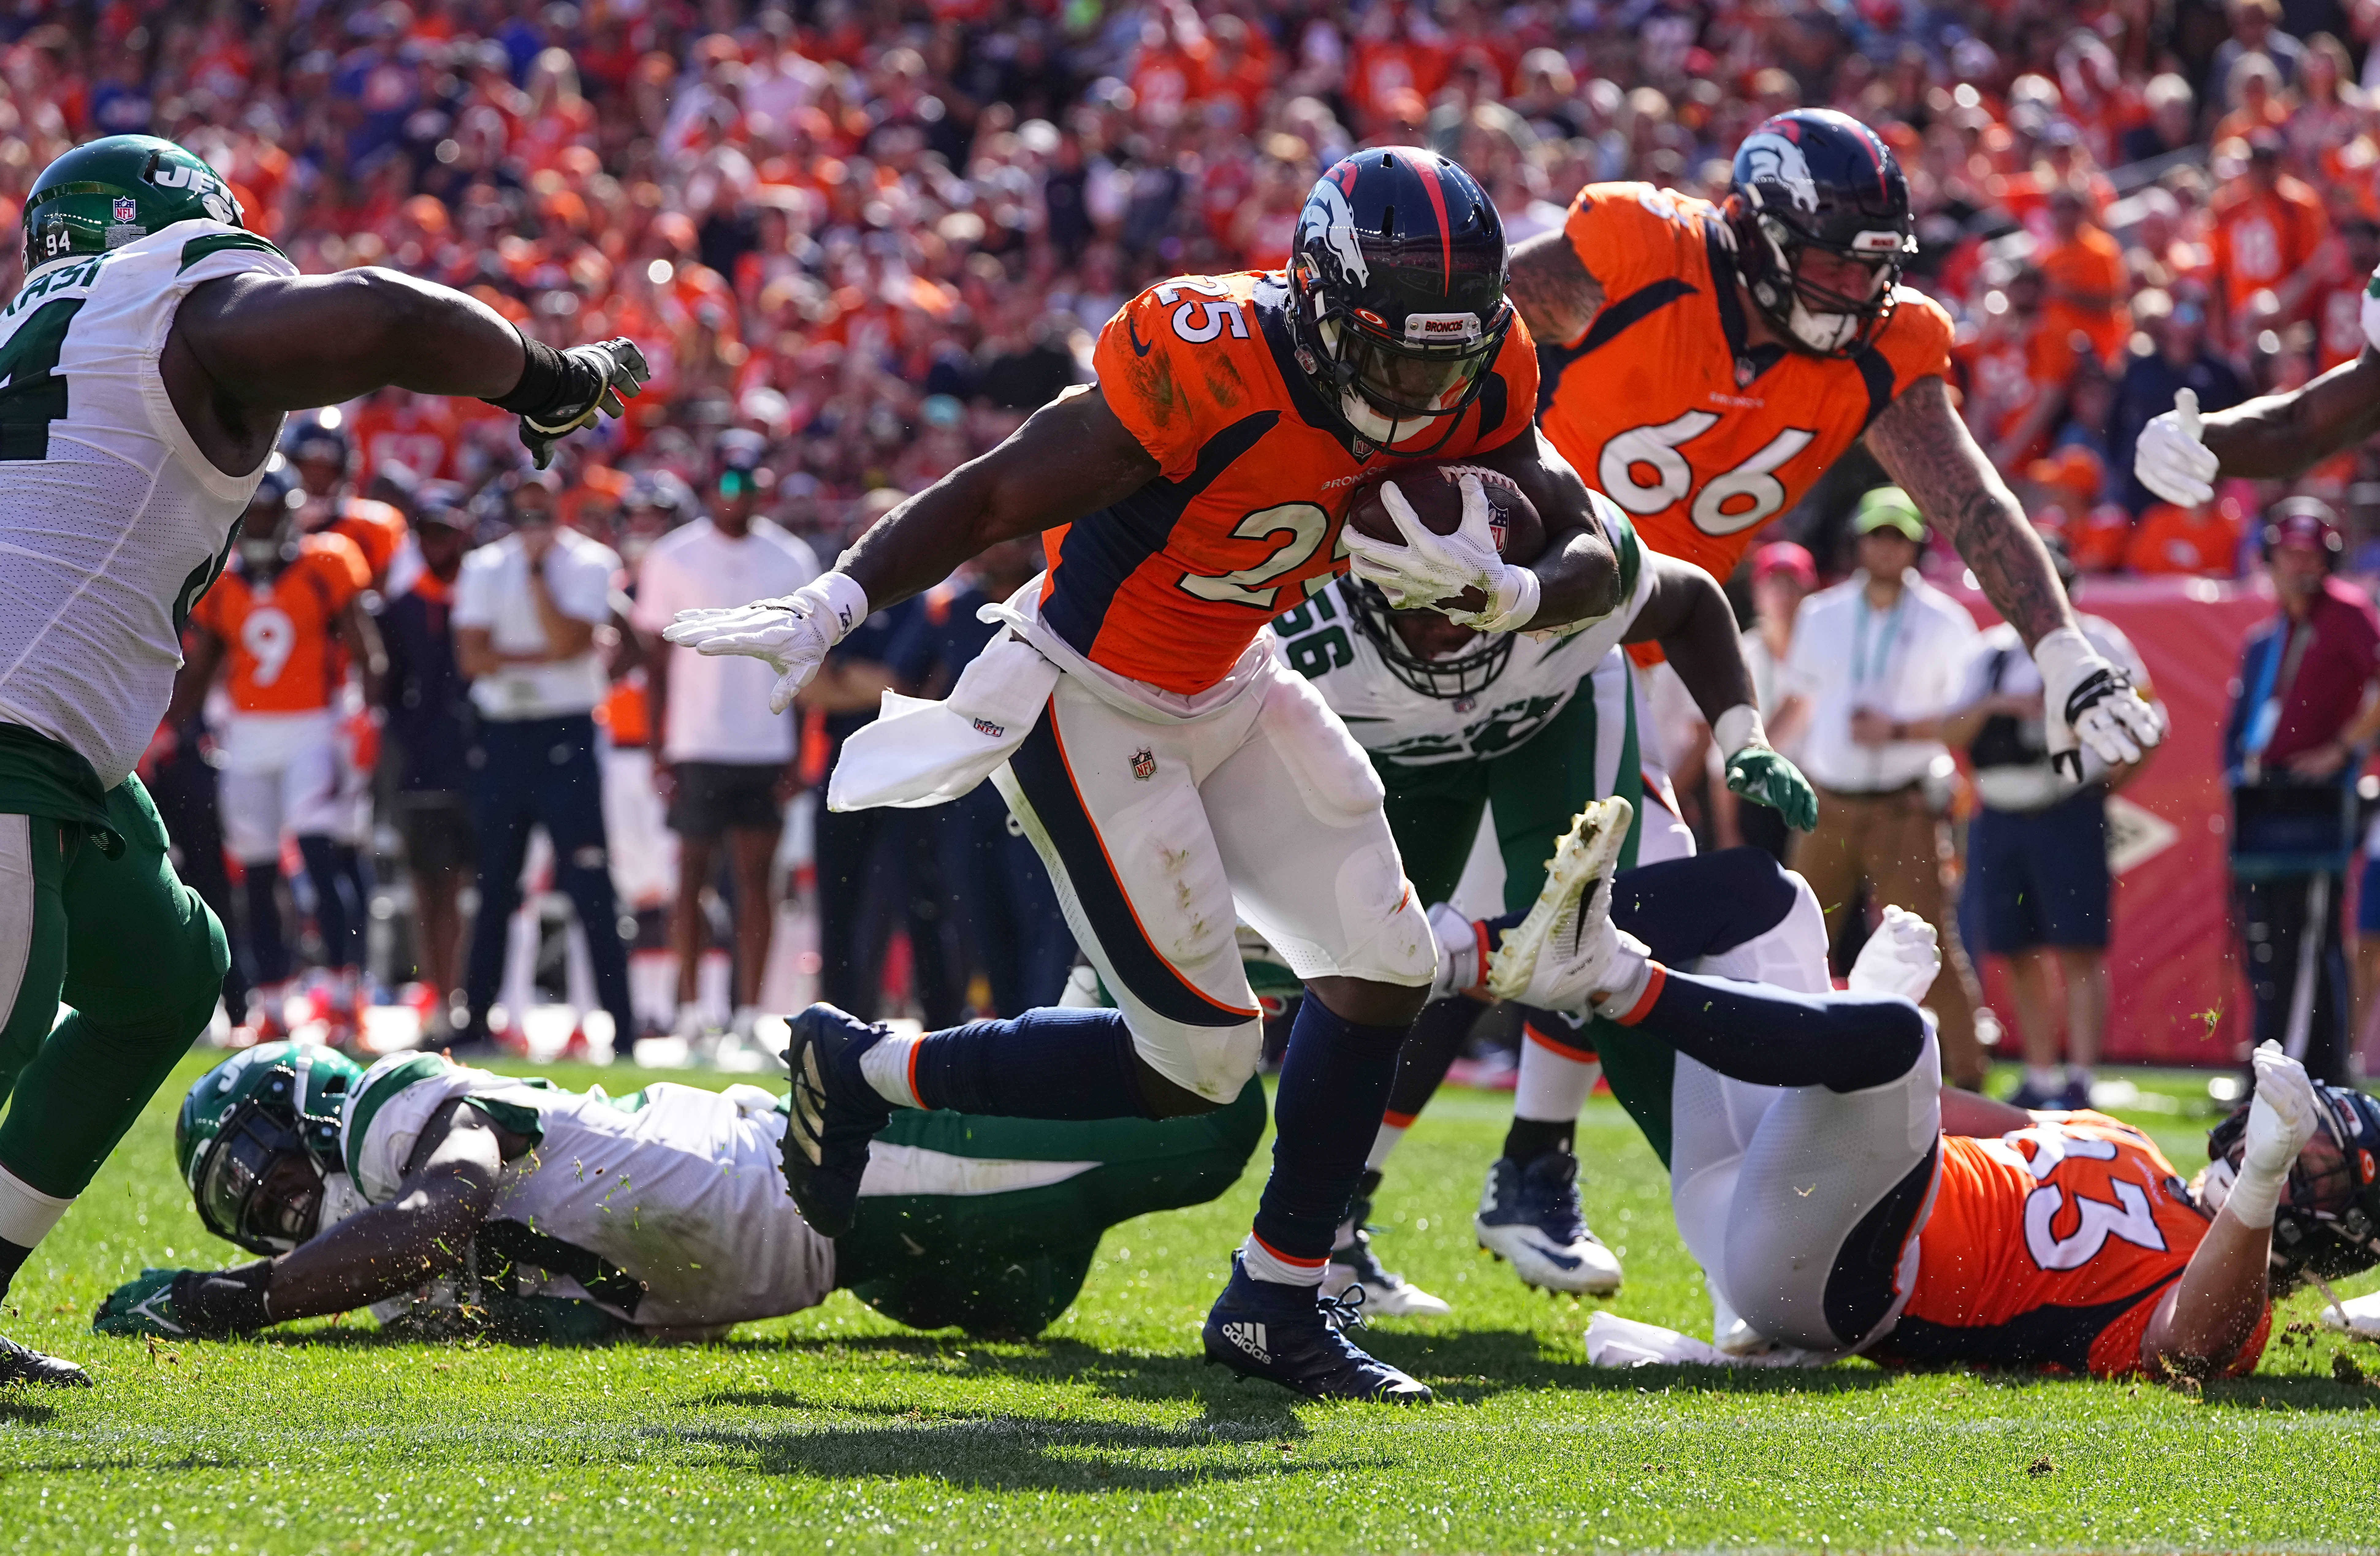 Jets lay another dud in loss to Broncos, drop to 0-3